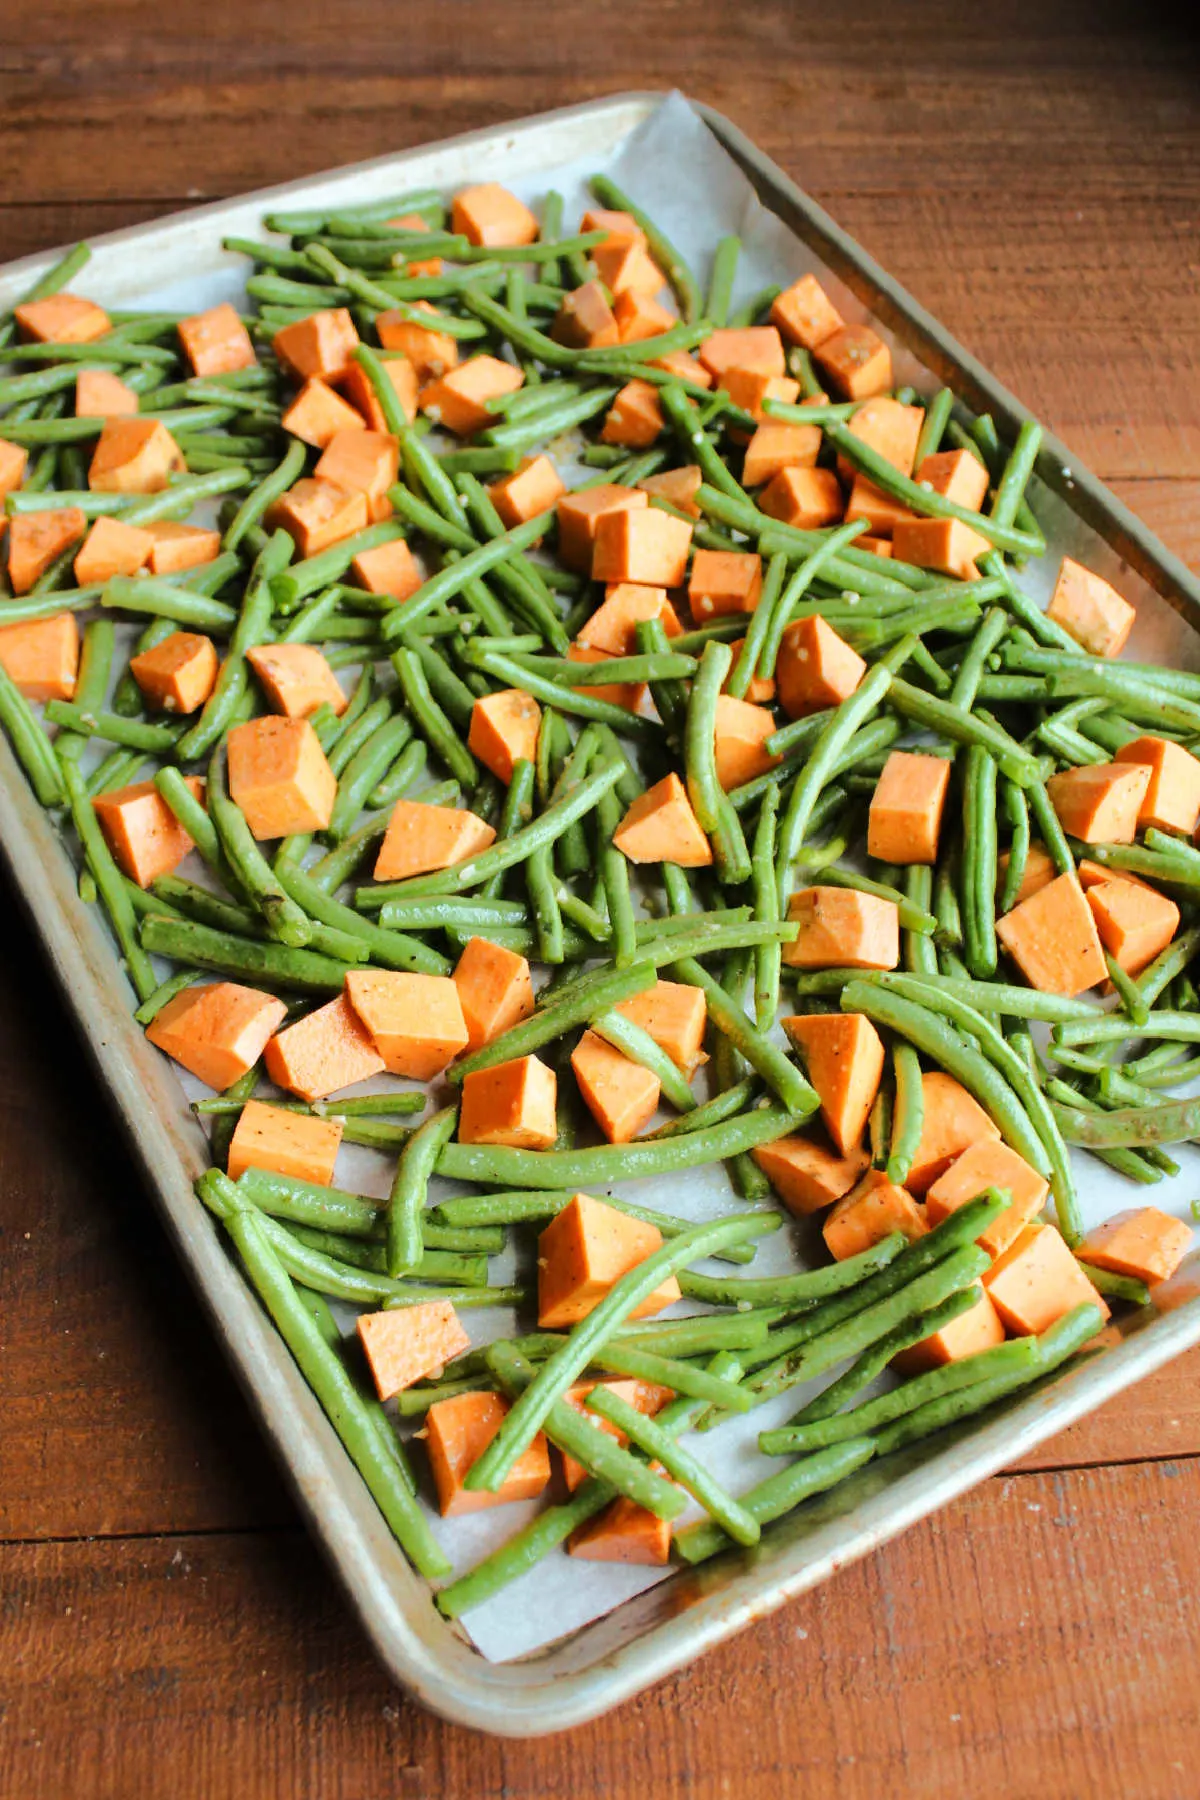 Trimmed green beans and sweet potato chunks tossed in oil and seasonings on sheet pan.